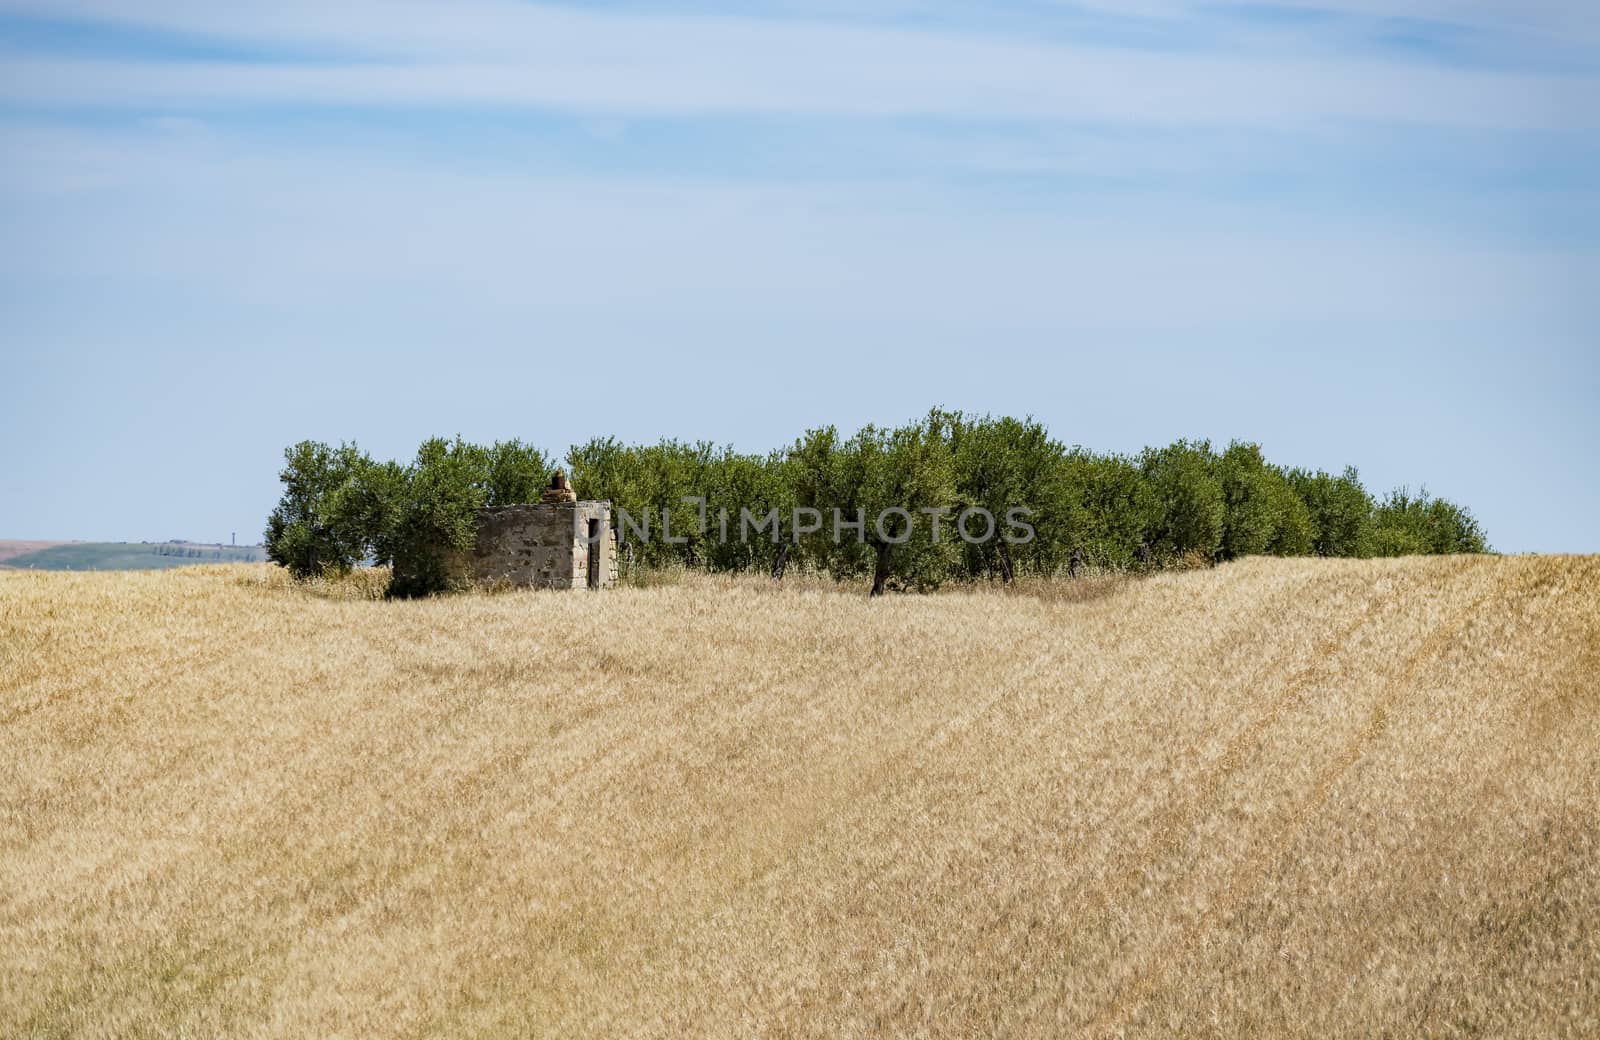 Hilly landscape with wheat field and trees by edella